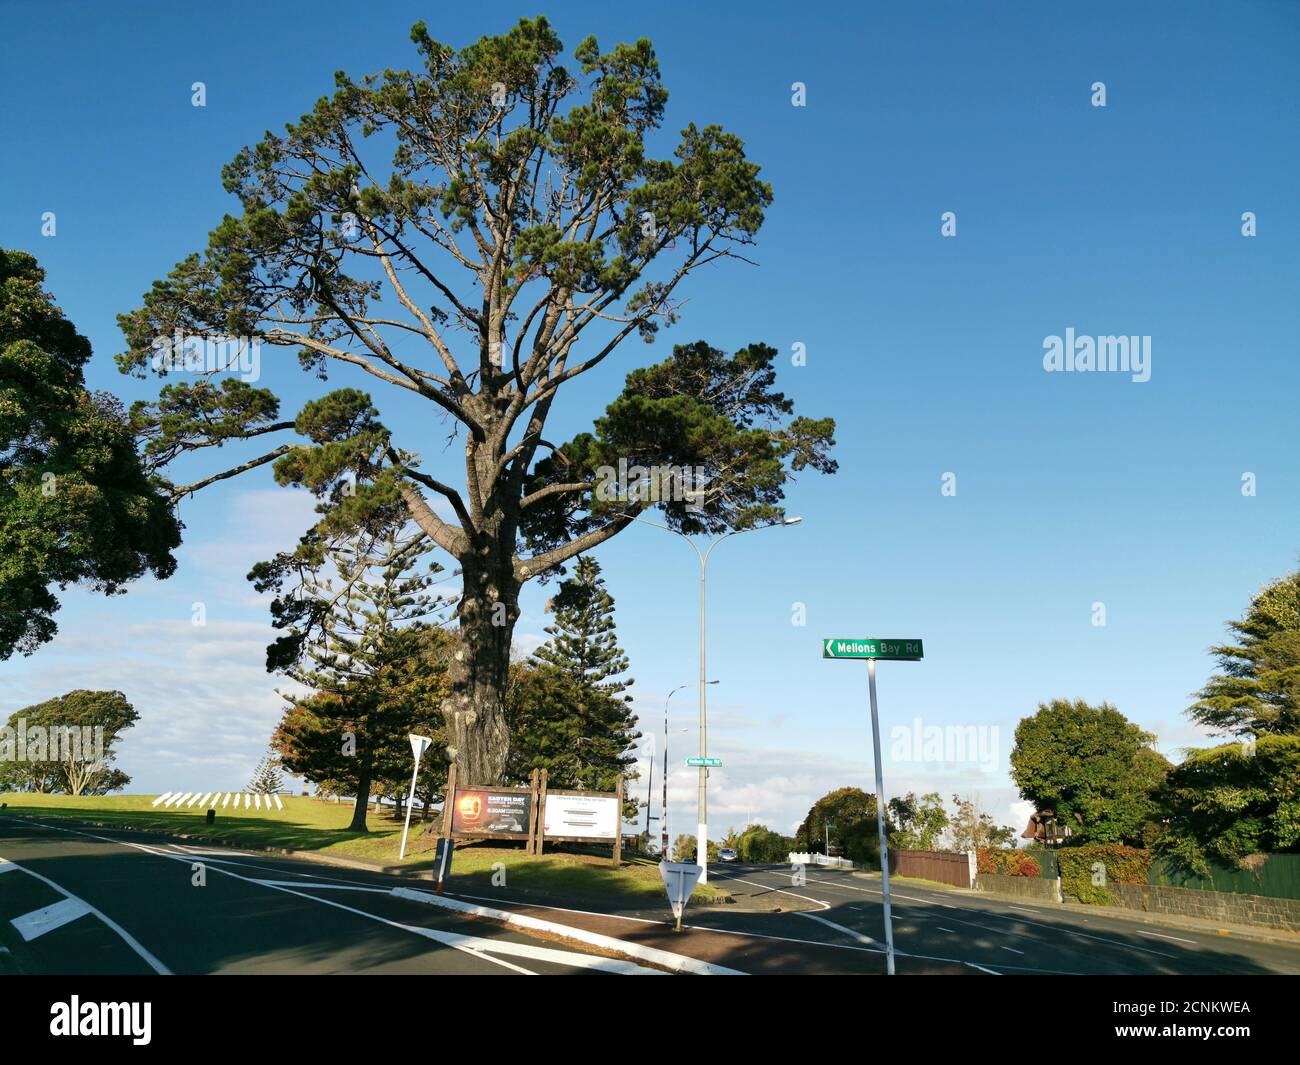 AUCKLAN, NEW ZEALAND - Apr 21, 2019: Auckland / New Zealand - April 21 2019: View of Howick Stockade Hill from Ridge Road and Mellons Bay Road interse Stock Photo